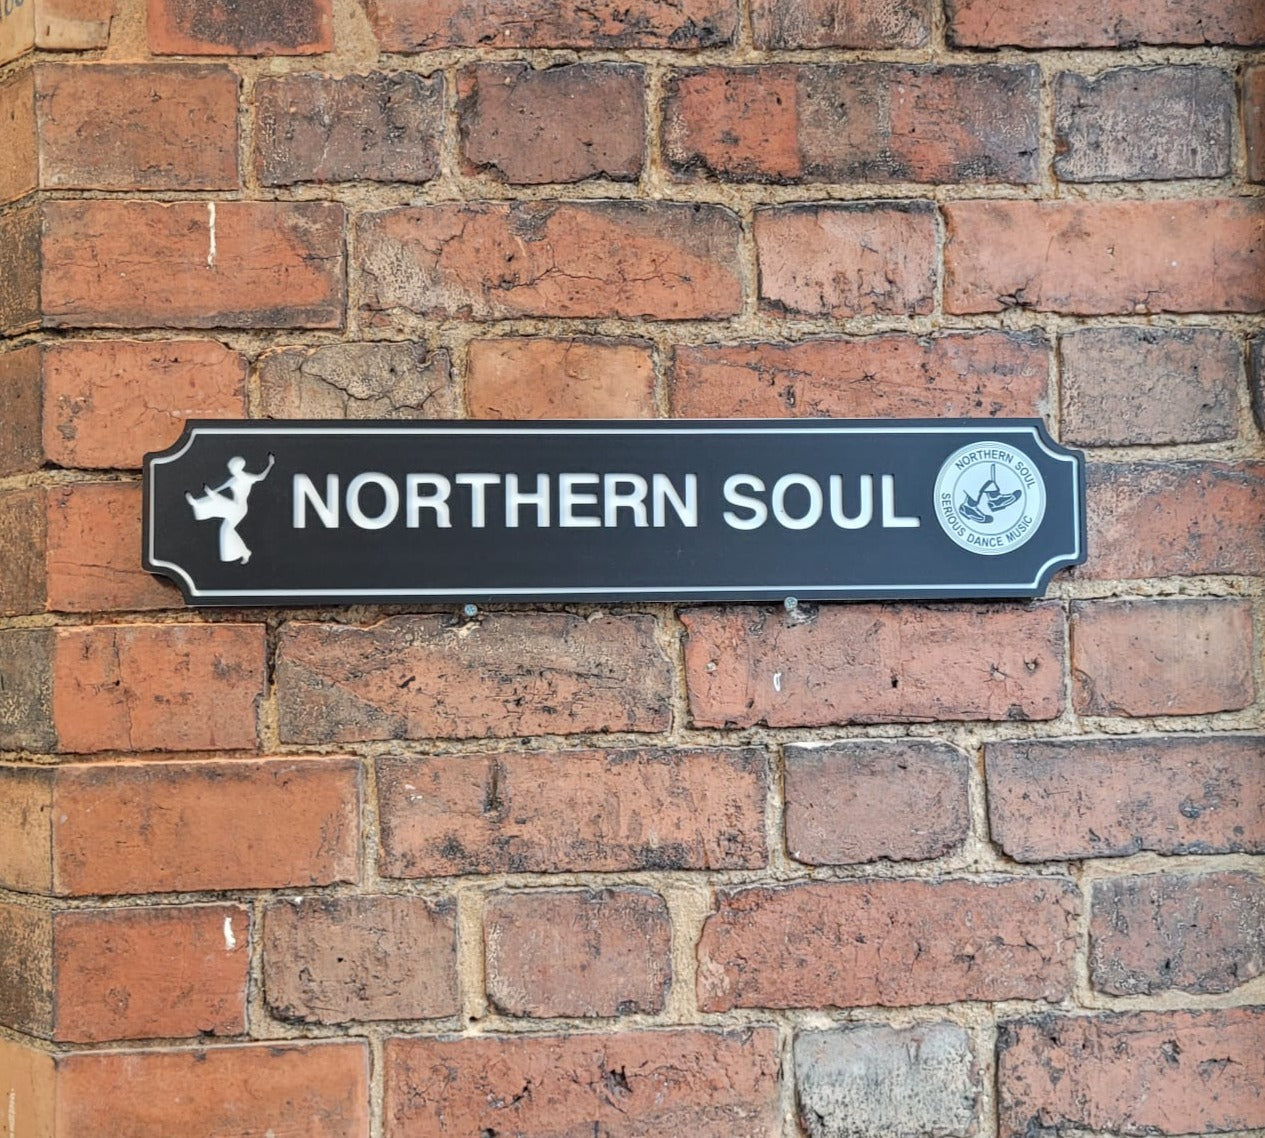 Northern Soul Street Sign